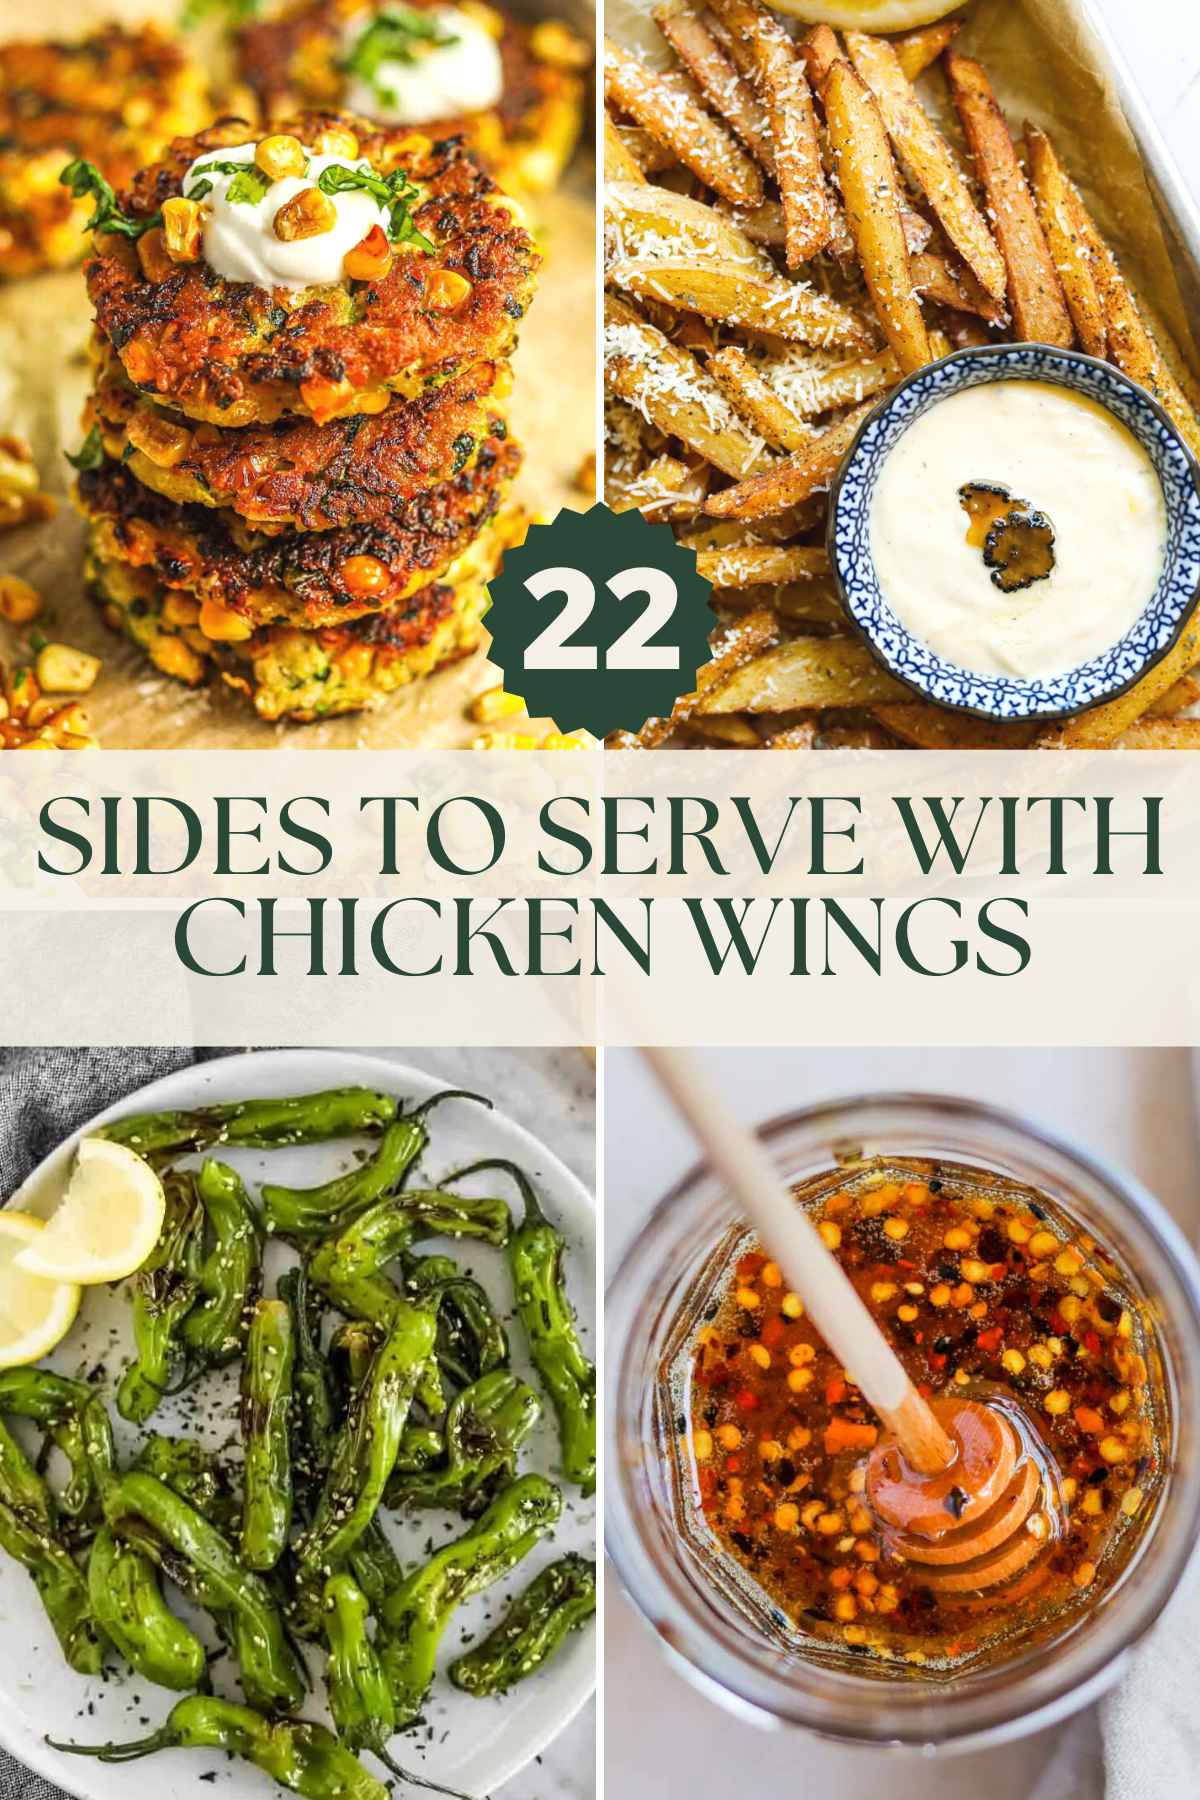 What to serve with chicken wings (22 tasty sides), including corn zucchini fritters, truffles parmesan fries, shishito pepper, and hot honey.